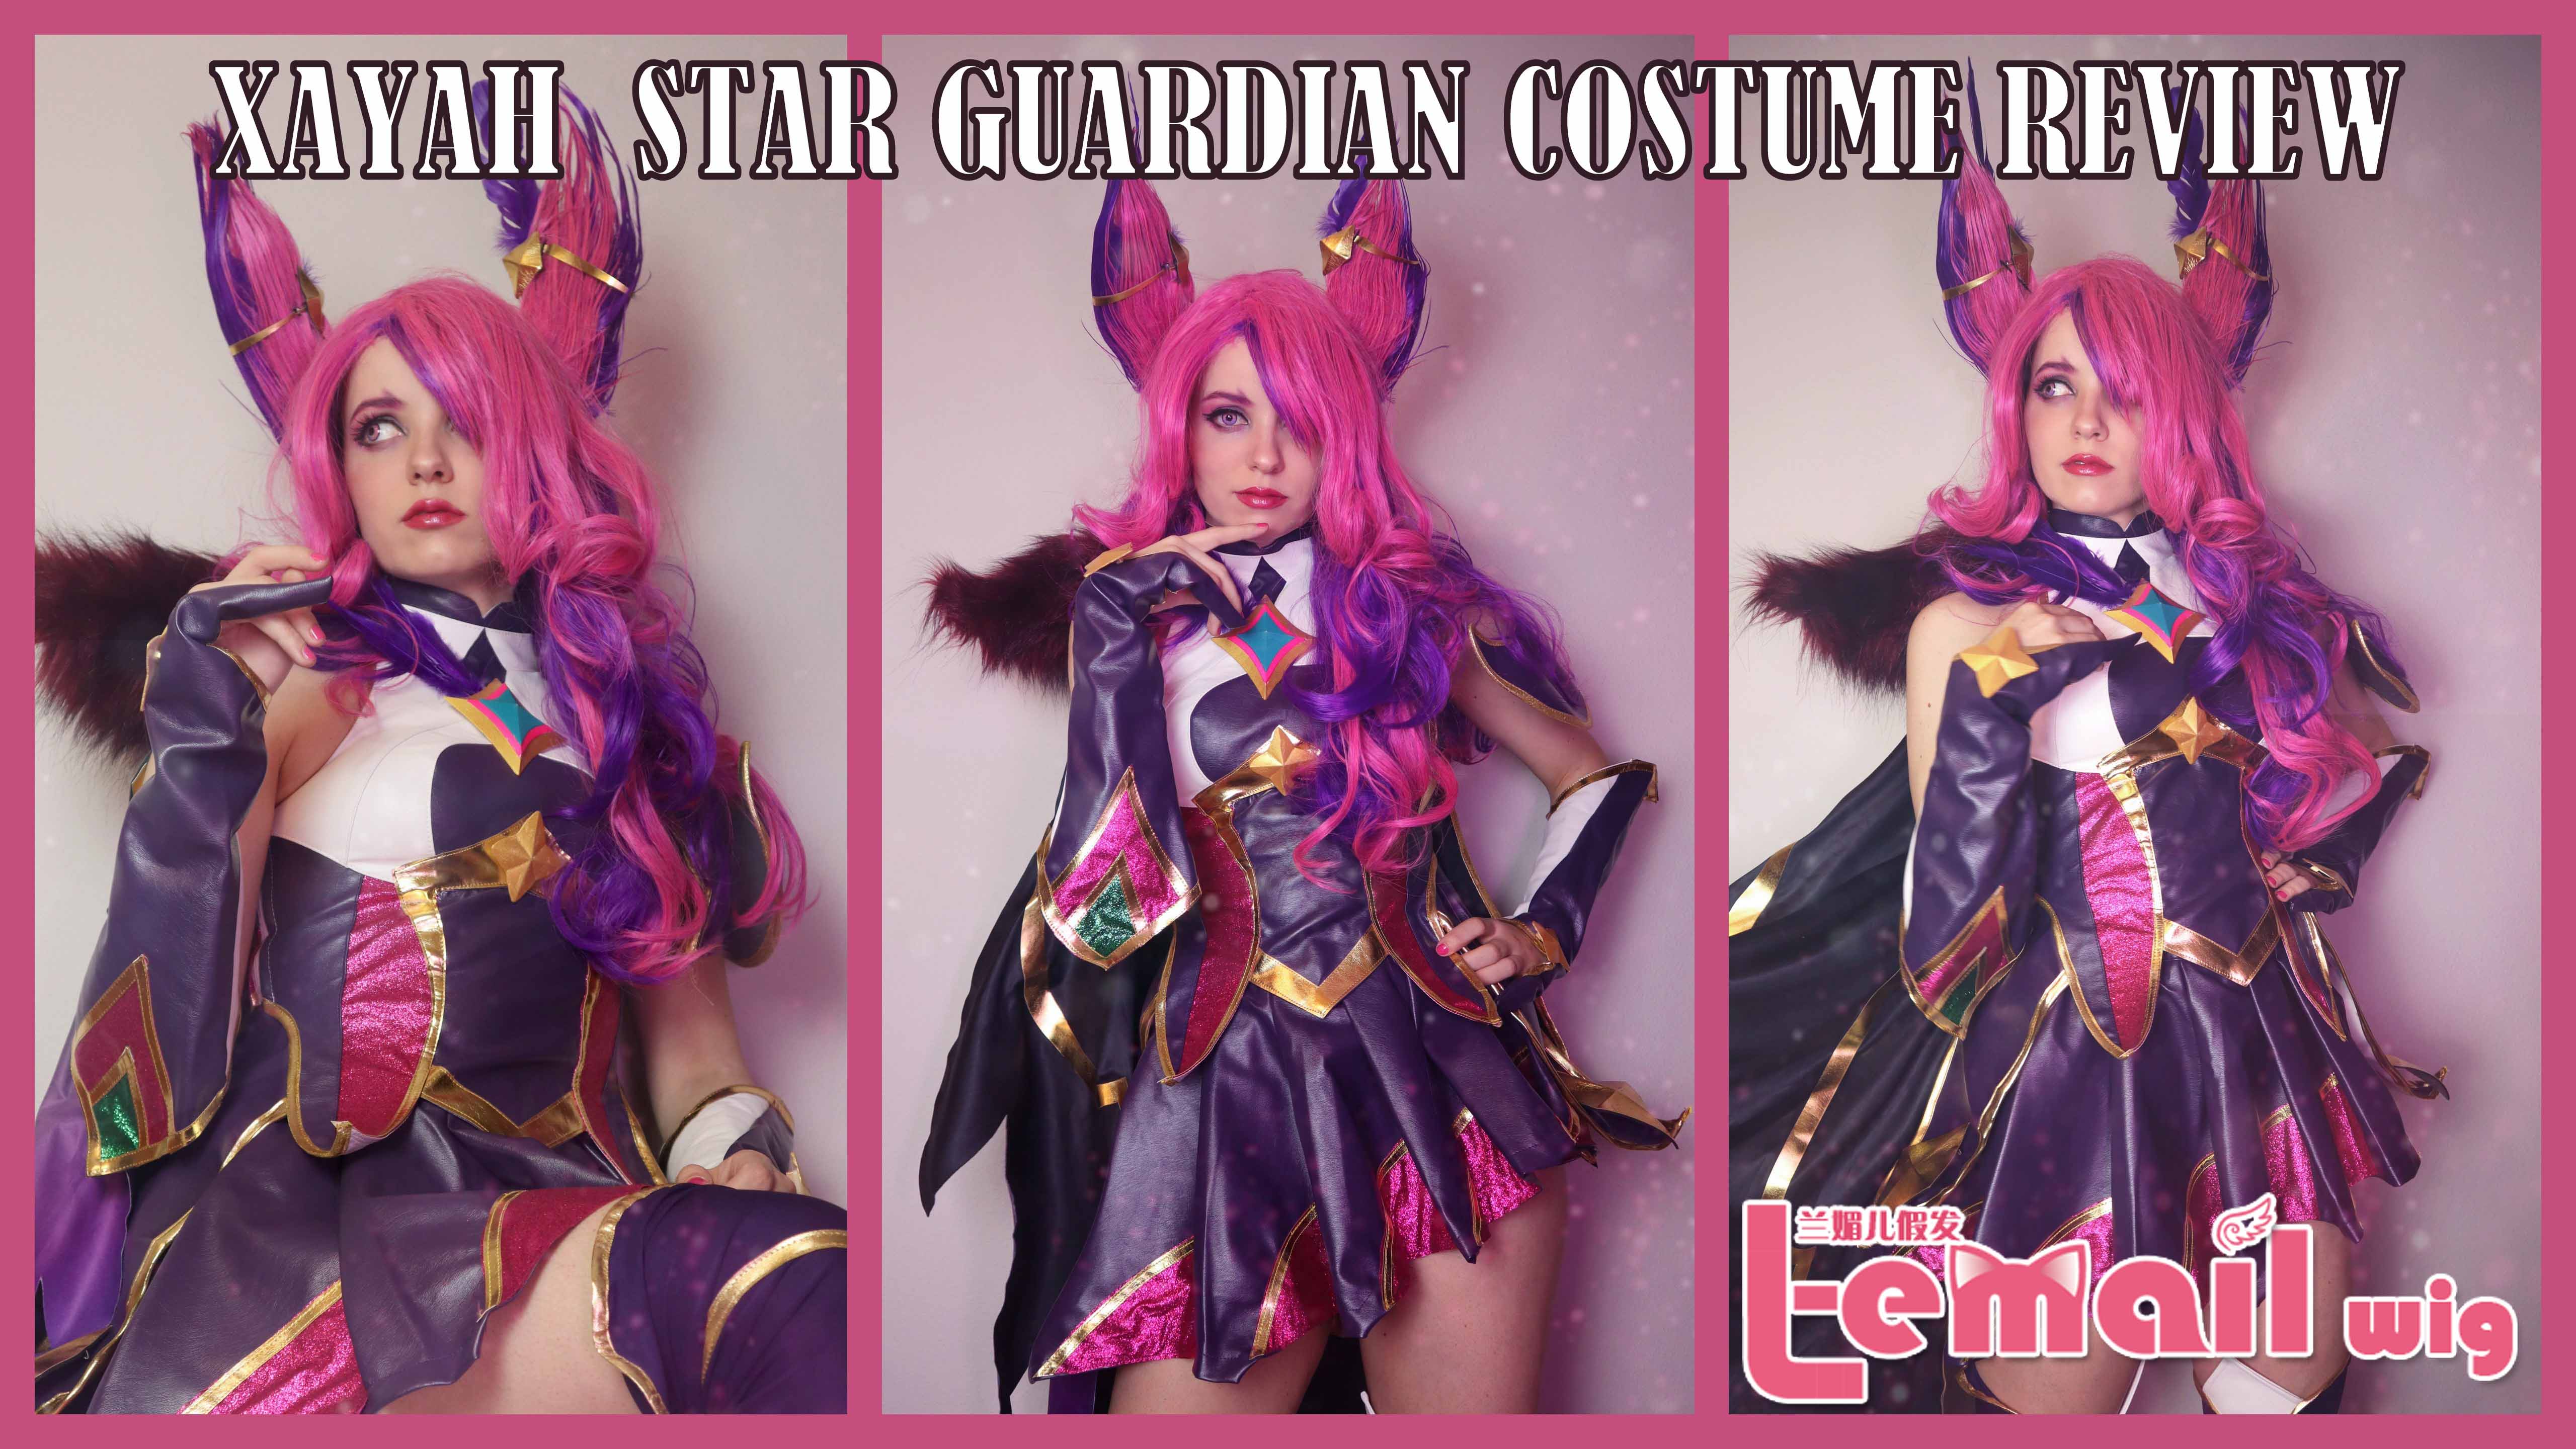 Cosplay Review: Xayah Star Guardian from L-email Wigs